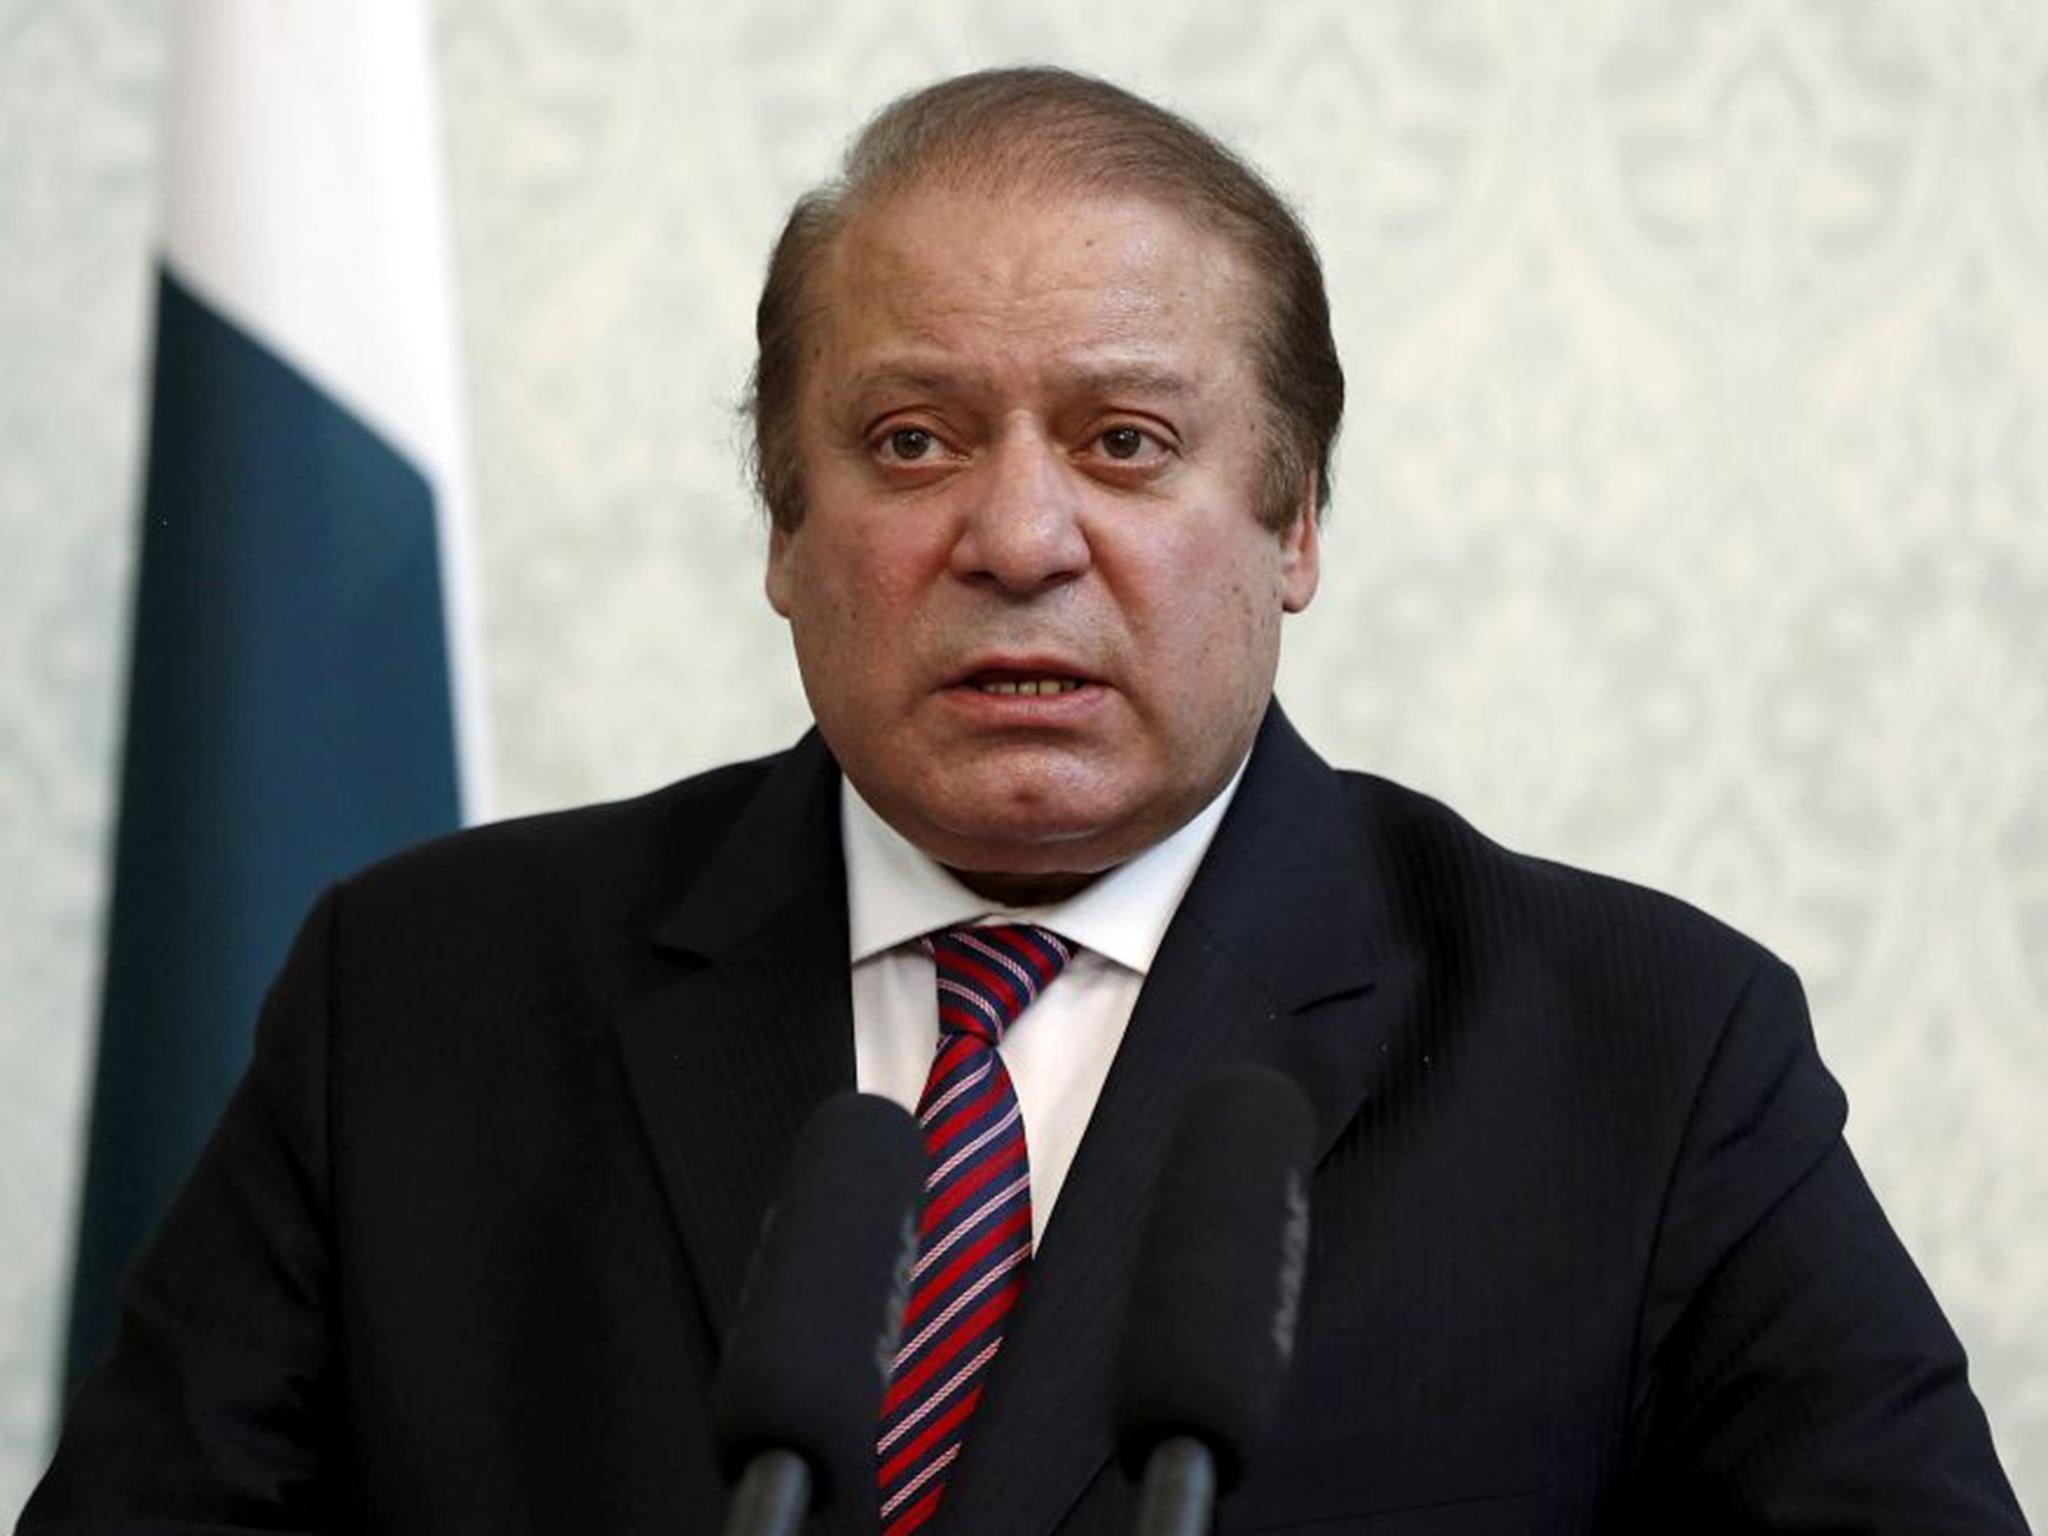 On Wednesday, the Islamabad High Court suspended the 10-year sentence for disgraced former prime minister Nawaz Sharif